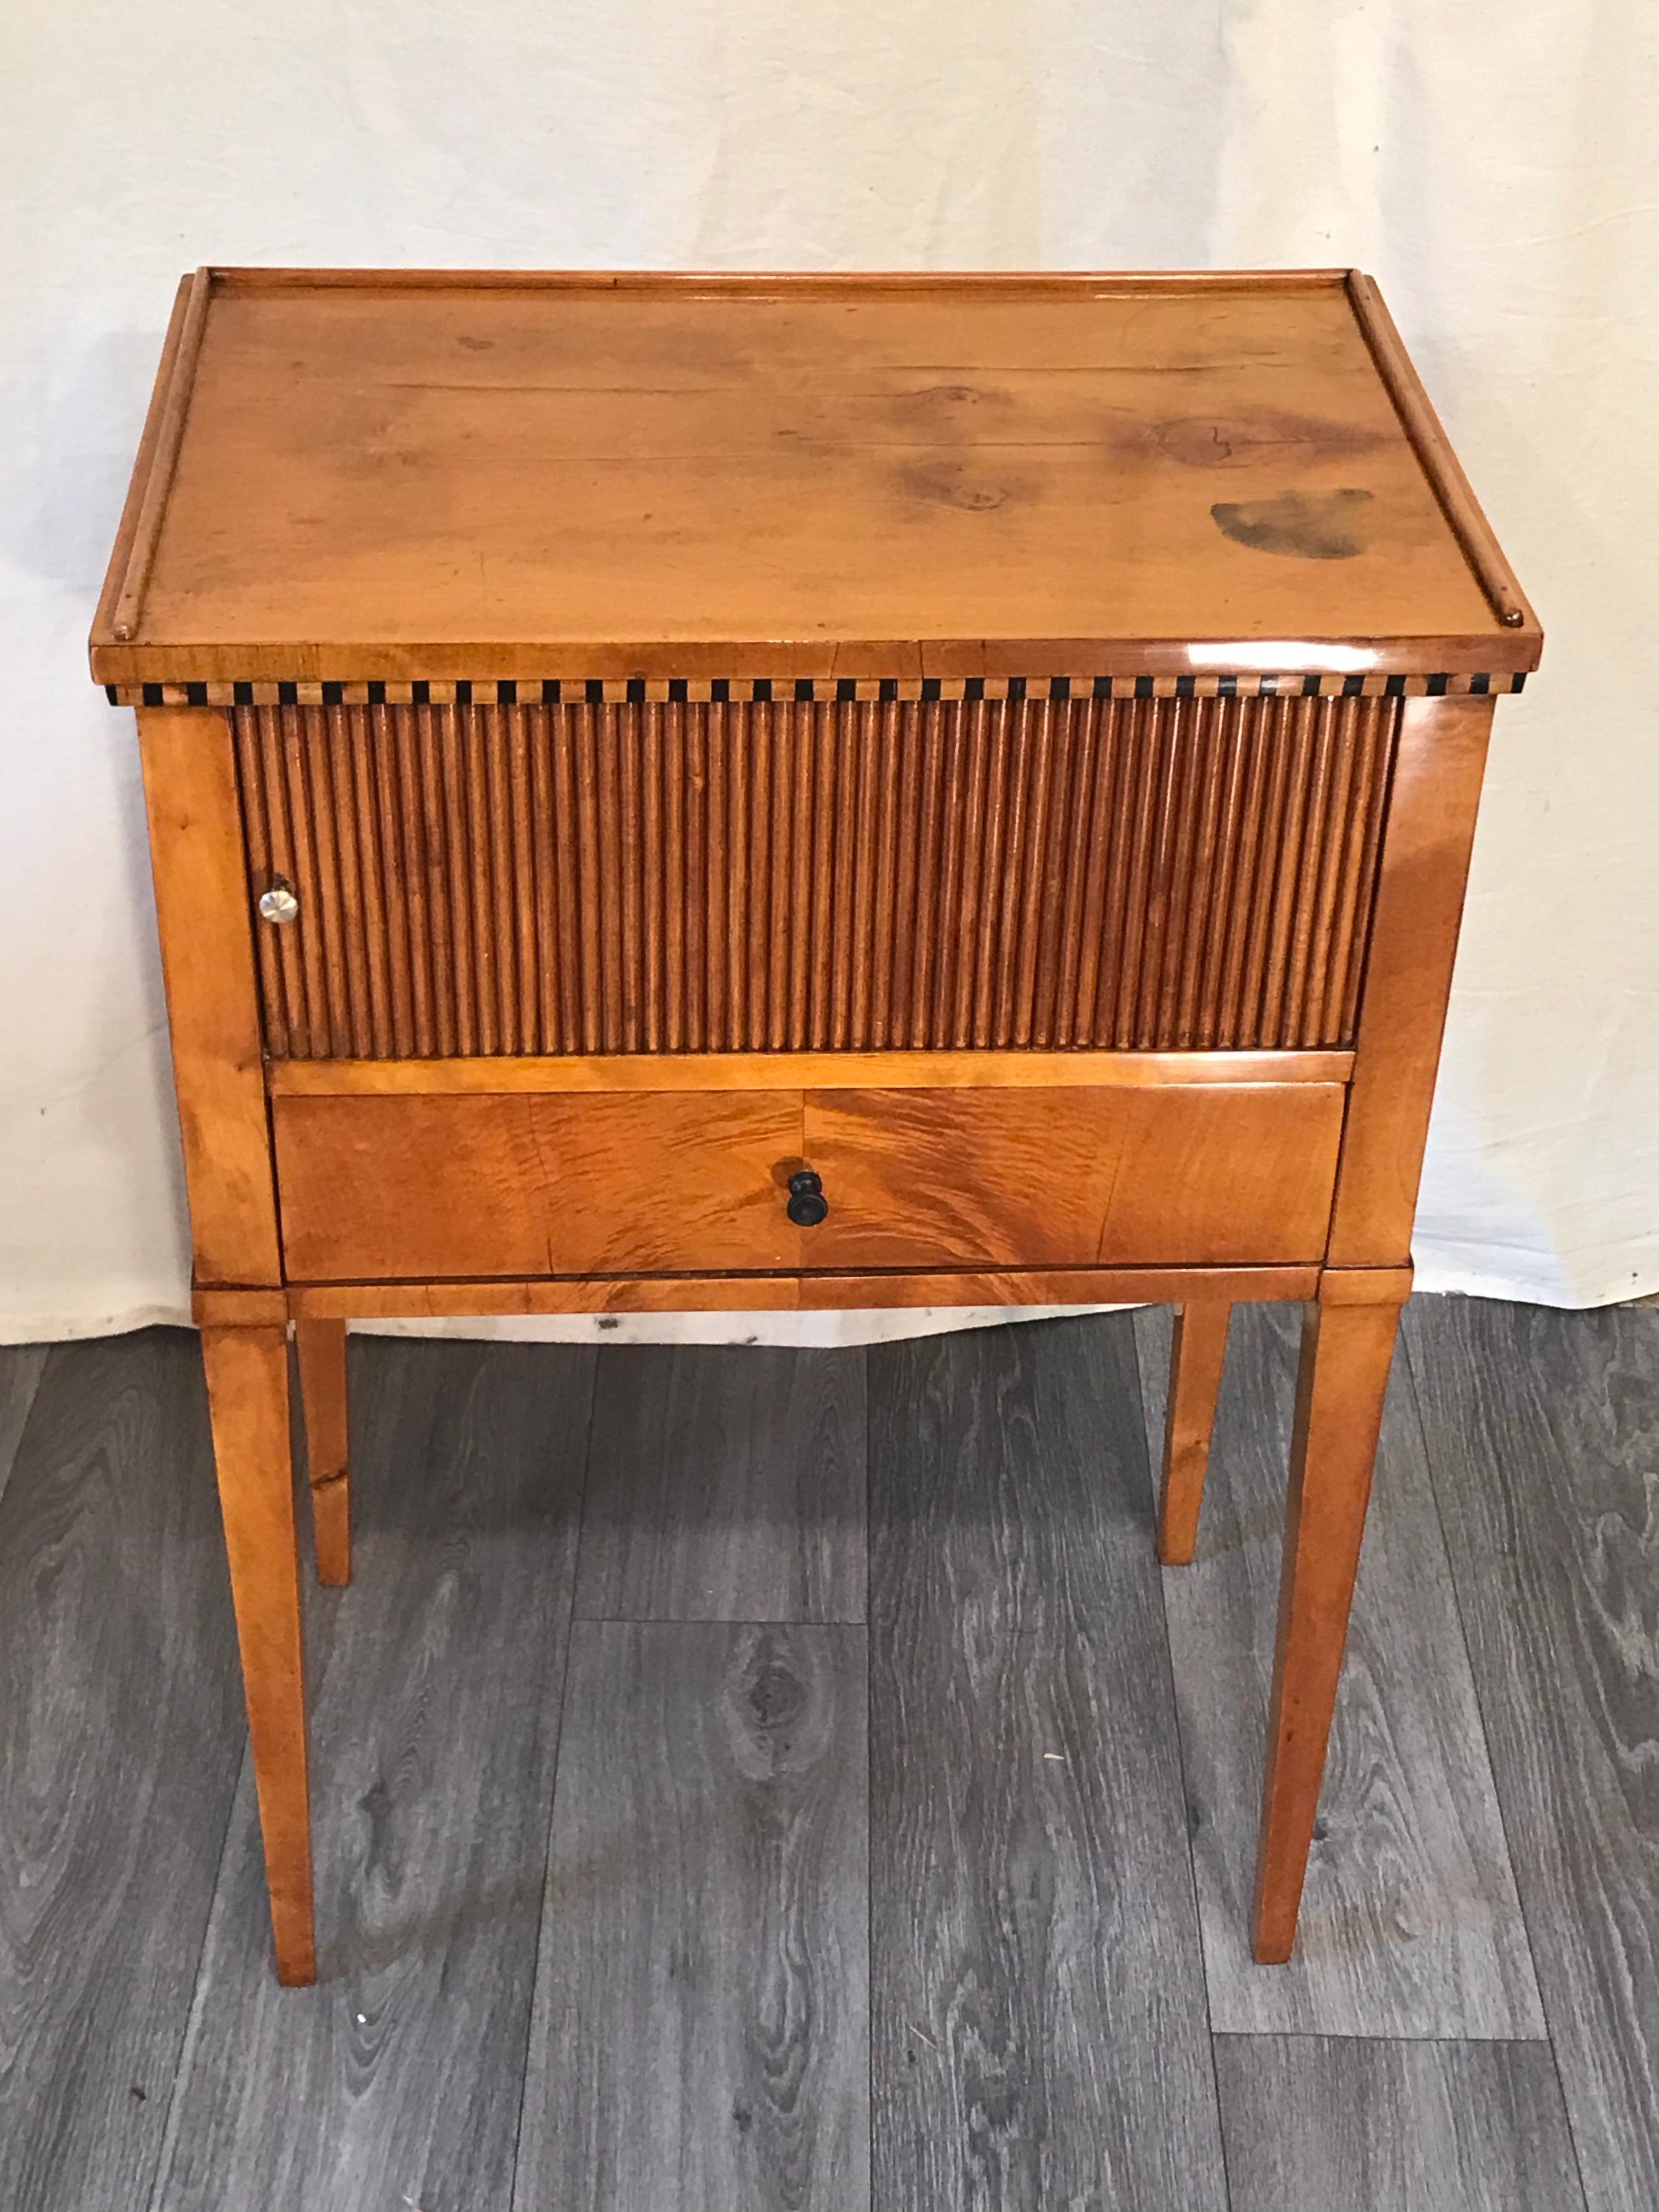 Biedermeier Nightstand or small cabinet, South Germany 1815-20, cherry veneer. Beautiful original piece. It has a pretty blinds door and one drawer. A wooden gallery is framing the top. Cherrywood veneer embellishes all sides of this small cabinet.